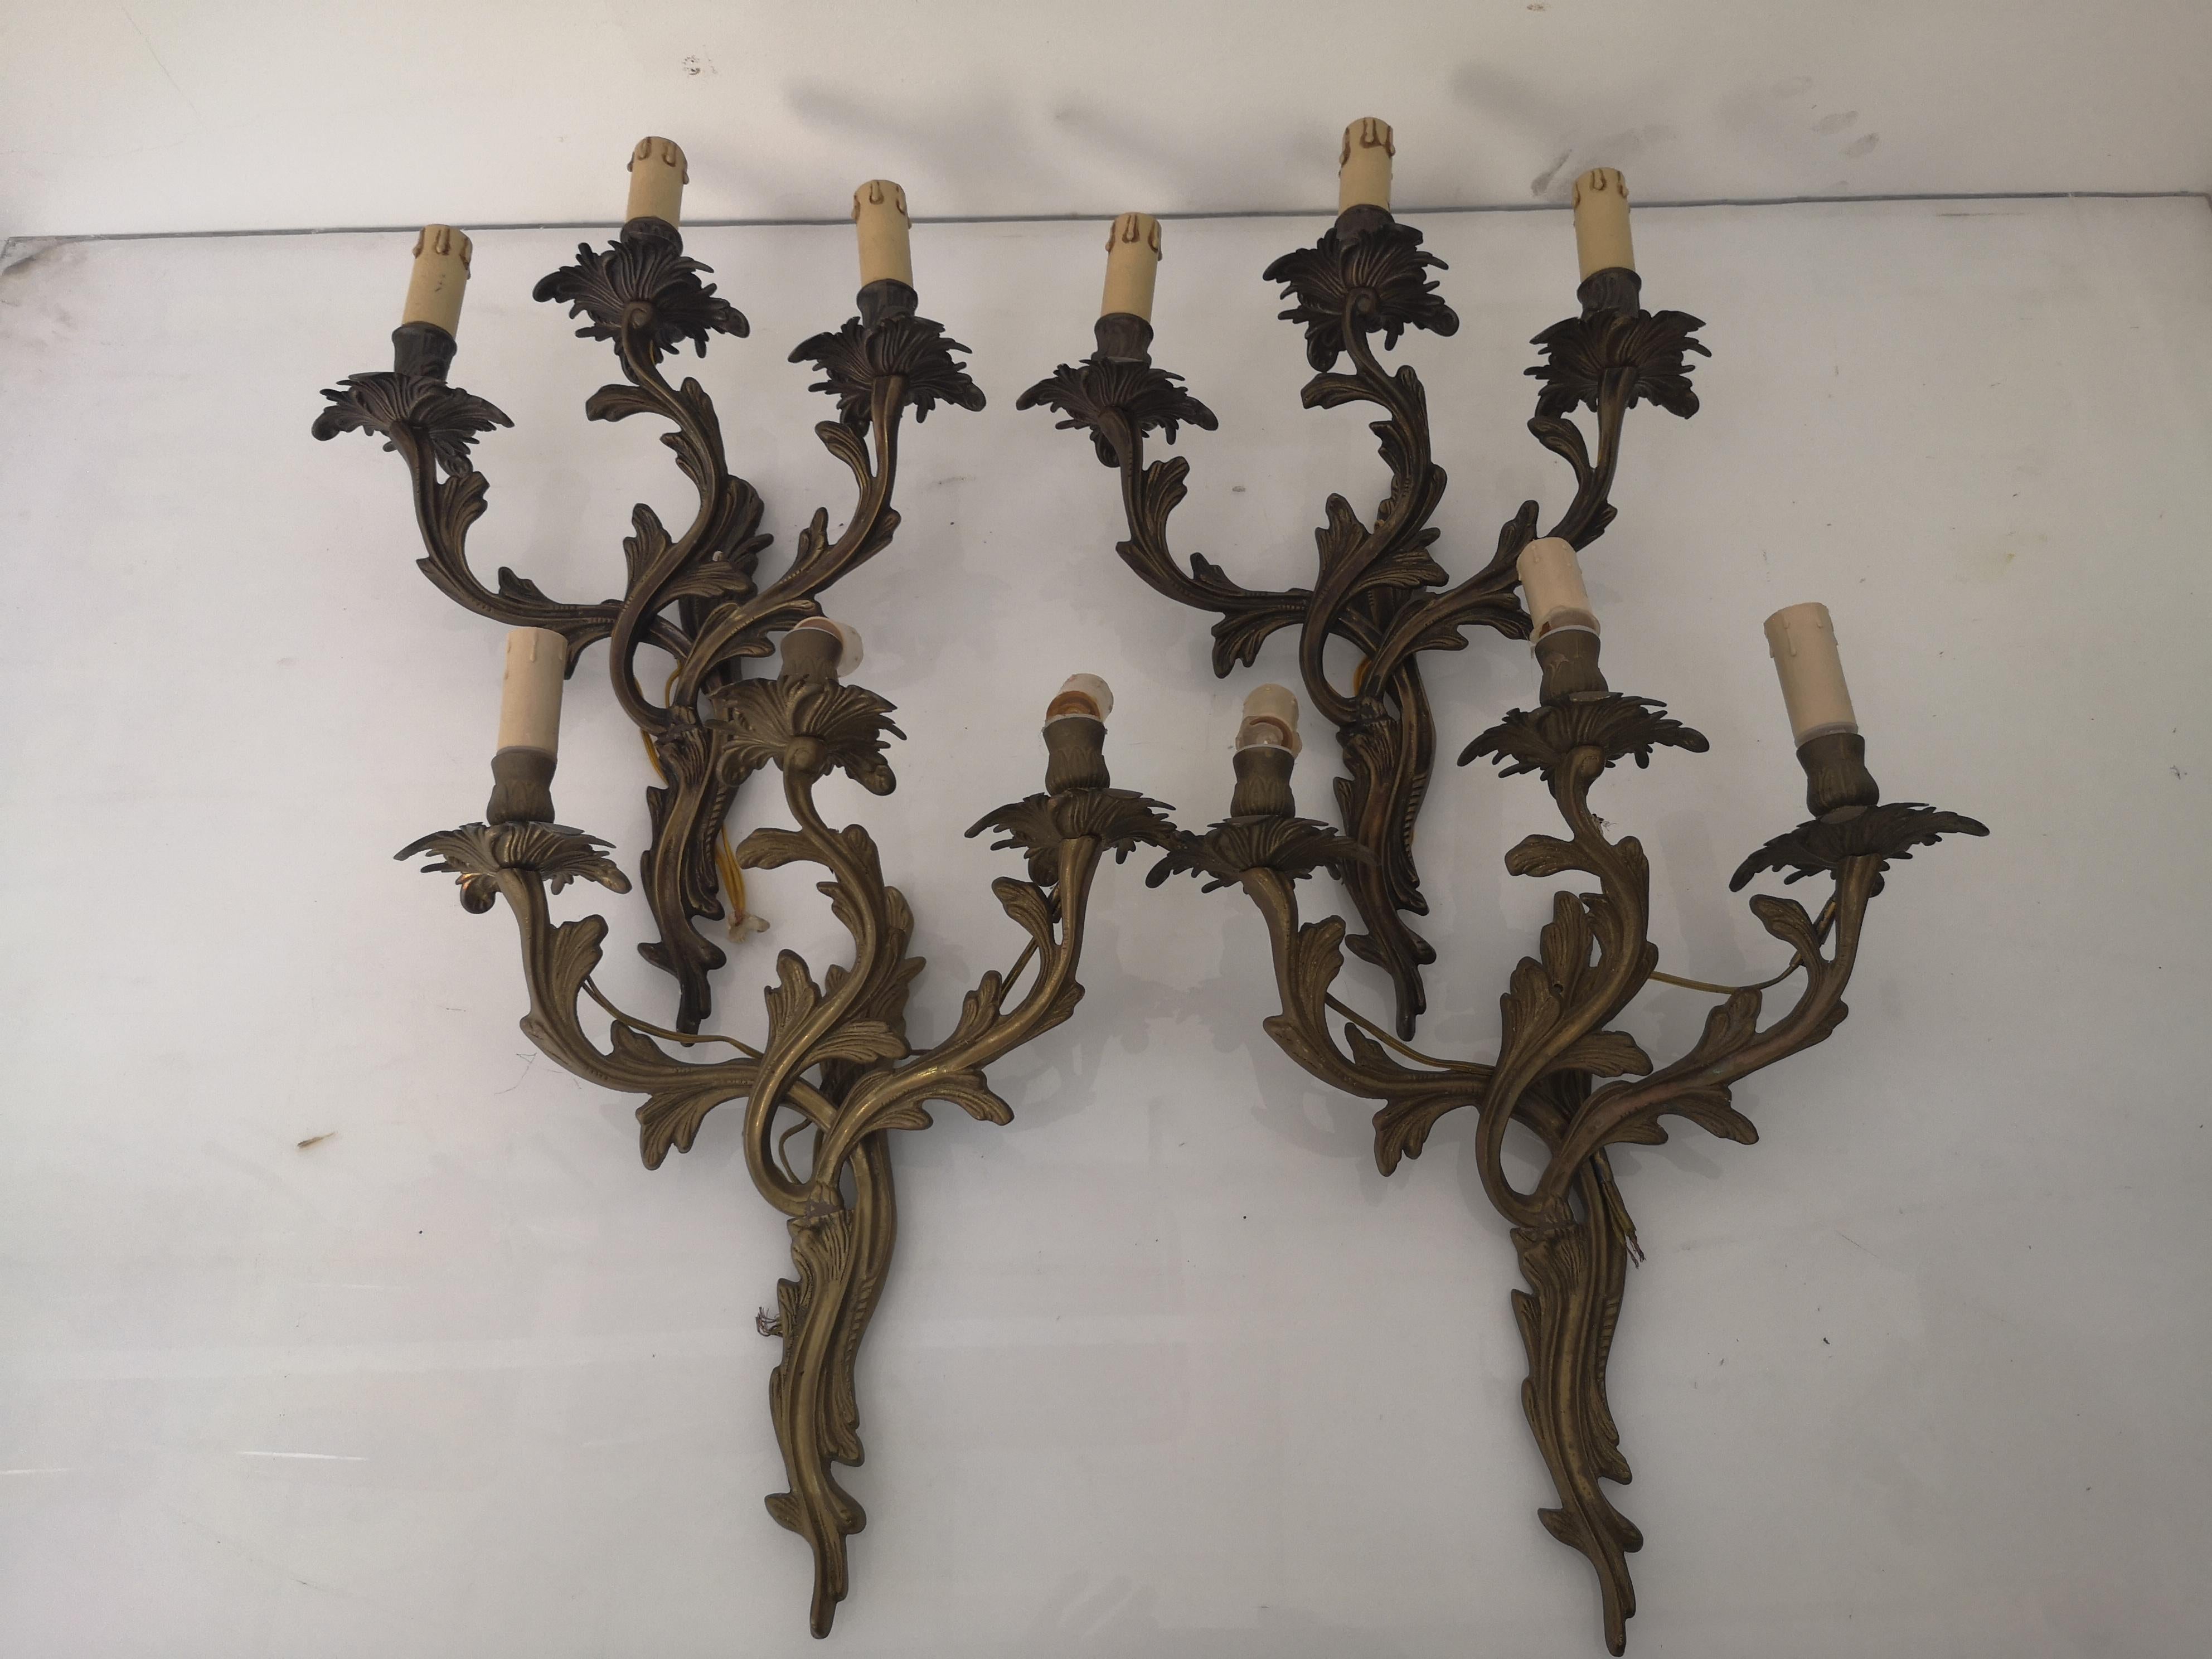 Set of 4 3-light bronze wall sconce in Louis XV style 1940s
The sconces are electrified, although the system is always best reviewed.
Measures: 
Height      cm 50
Width 30 cm
Depth 15 cm